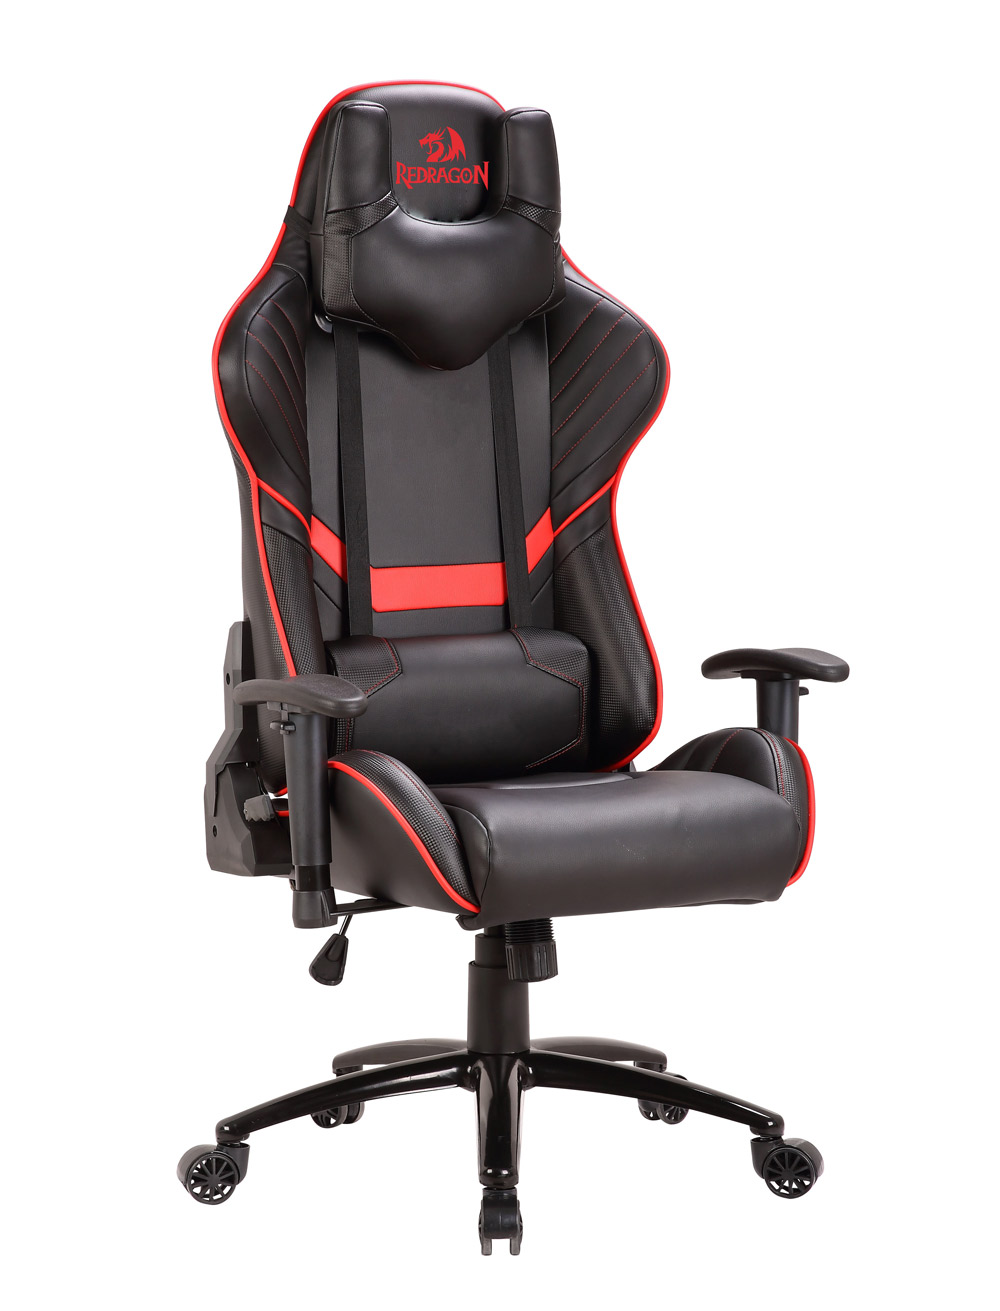 Redragon COEUS Gaming Chair Black and Red Best Deal